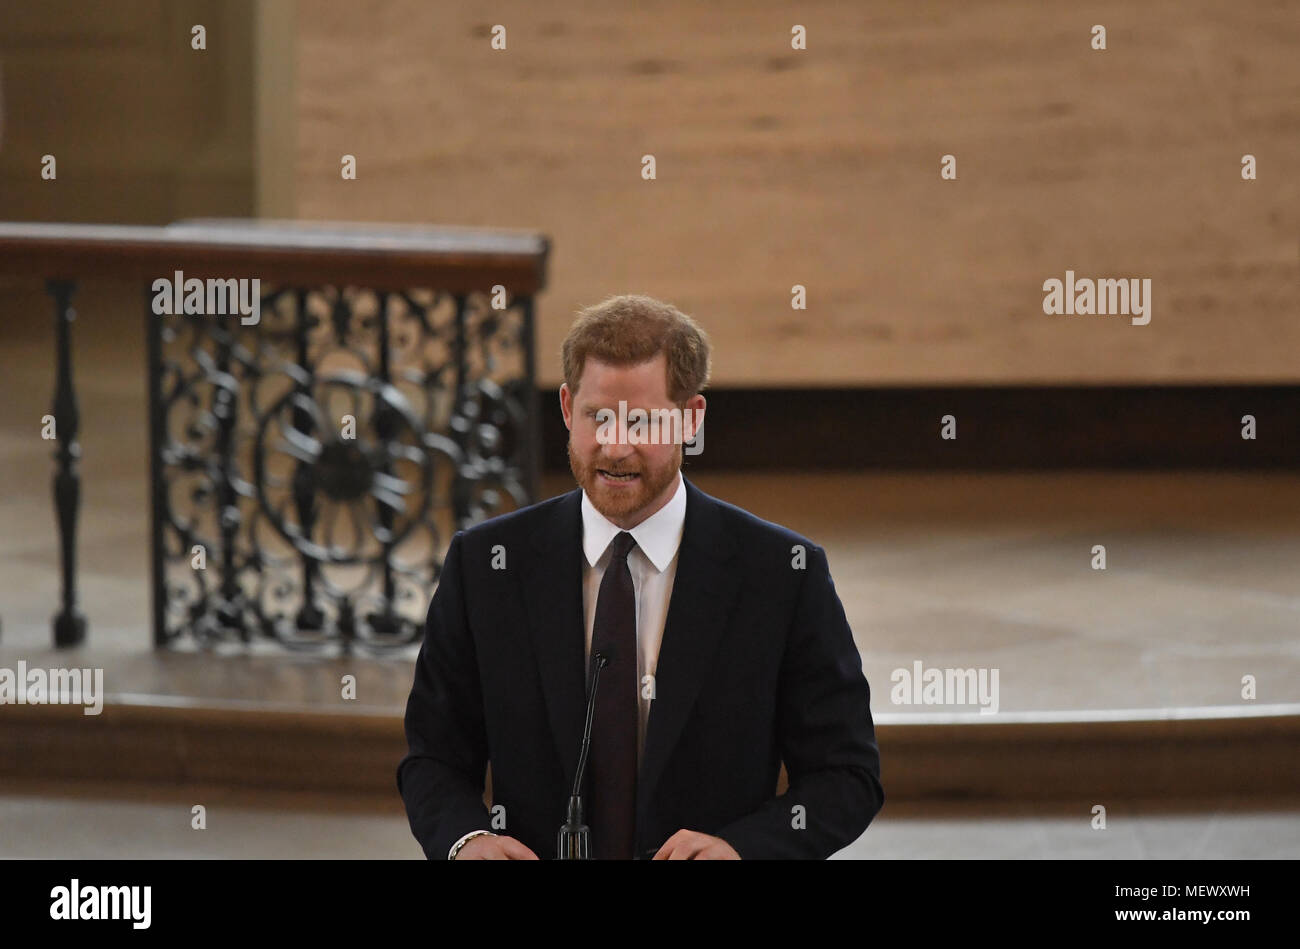 Prince Harry speaking during the memorial service at St Martin-in-the-Fields in Trafalgar Square, London to commemorate the 25th anniversary of the murder of Stephen Lawrence. Stock Photo